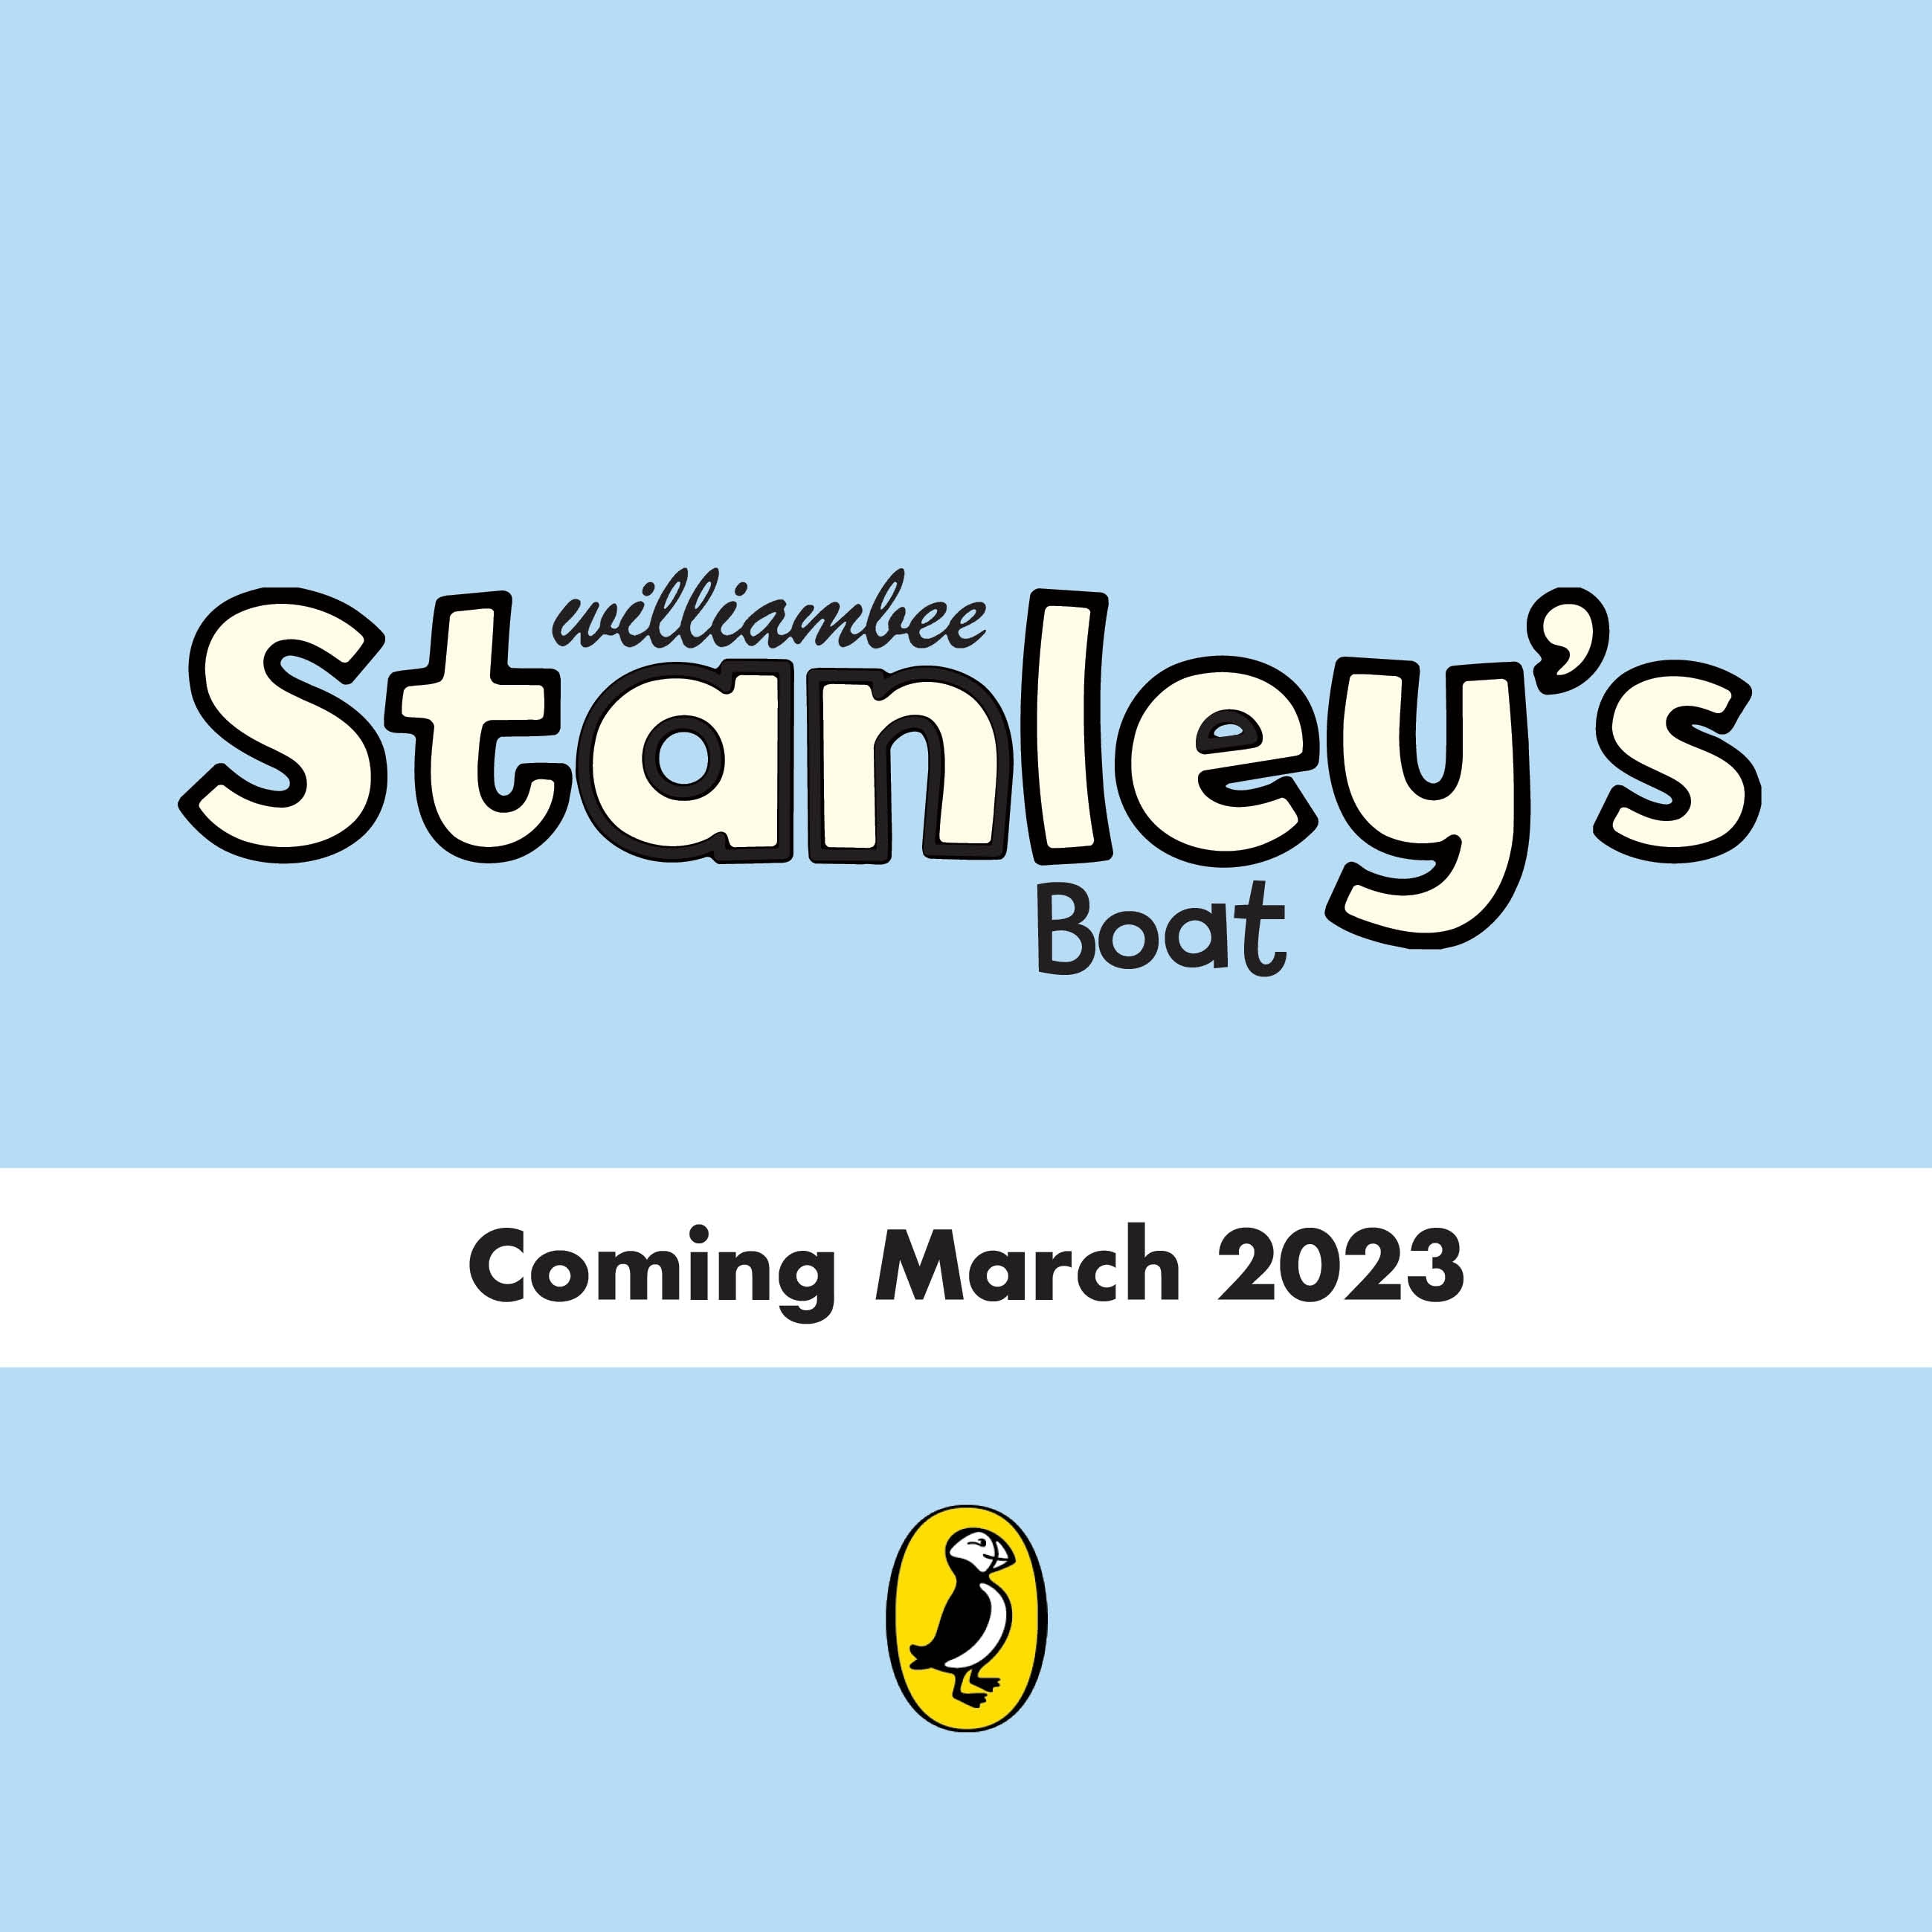 Book “Stanley's Boat” by William Bee — March 2, 2023